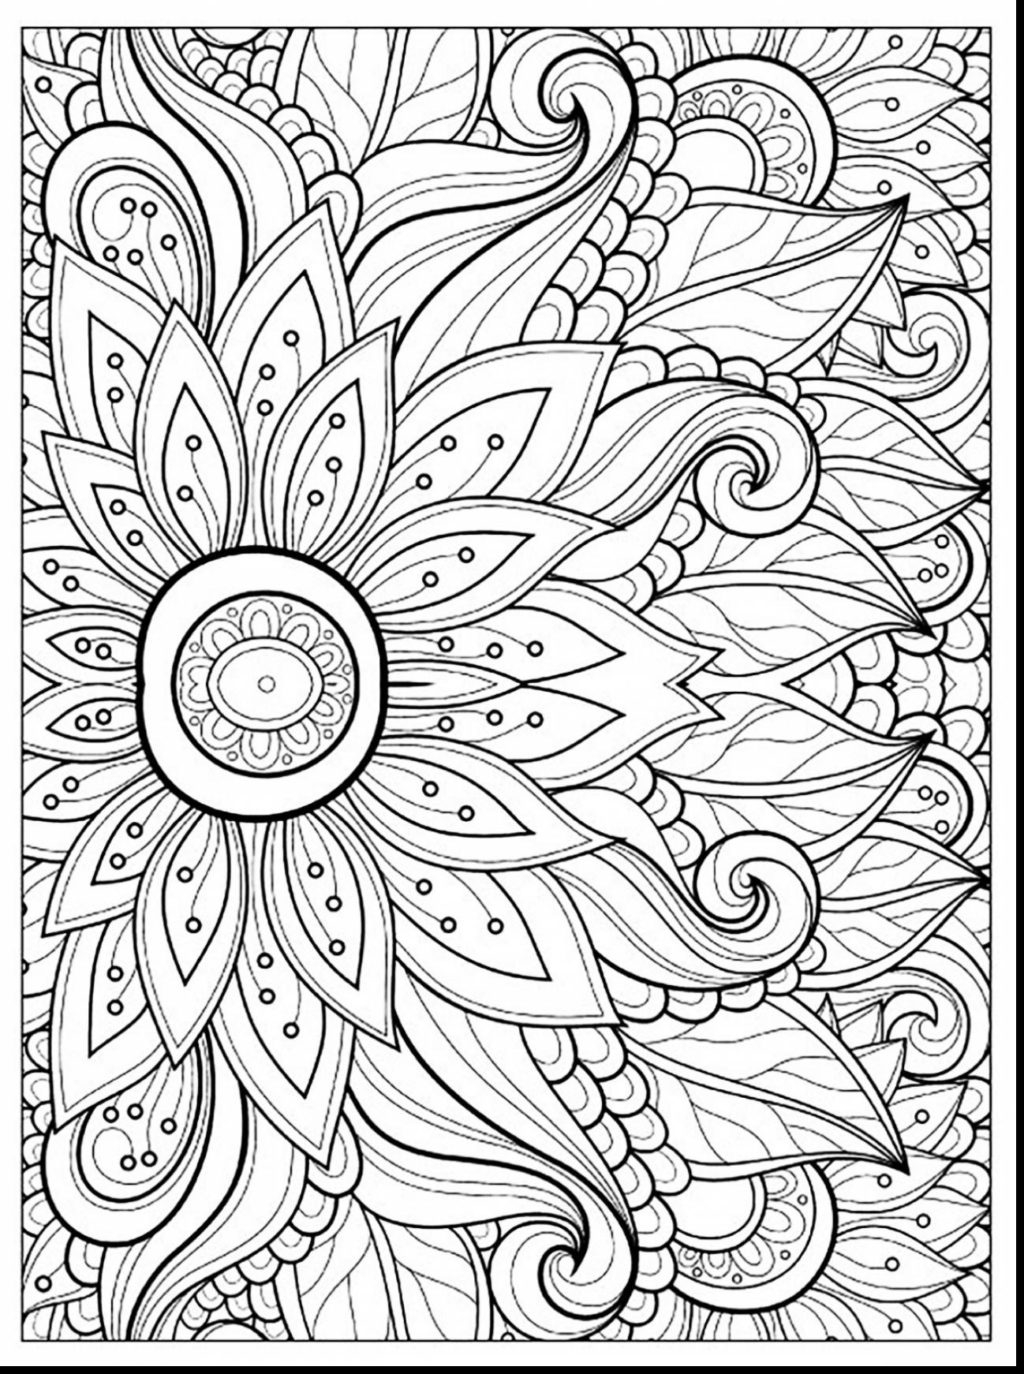 Spring Coloring Pages For Toddlers Coloring Books 39 Printable Spring Coloring Pages Photo Ideas